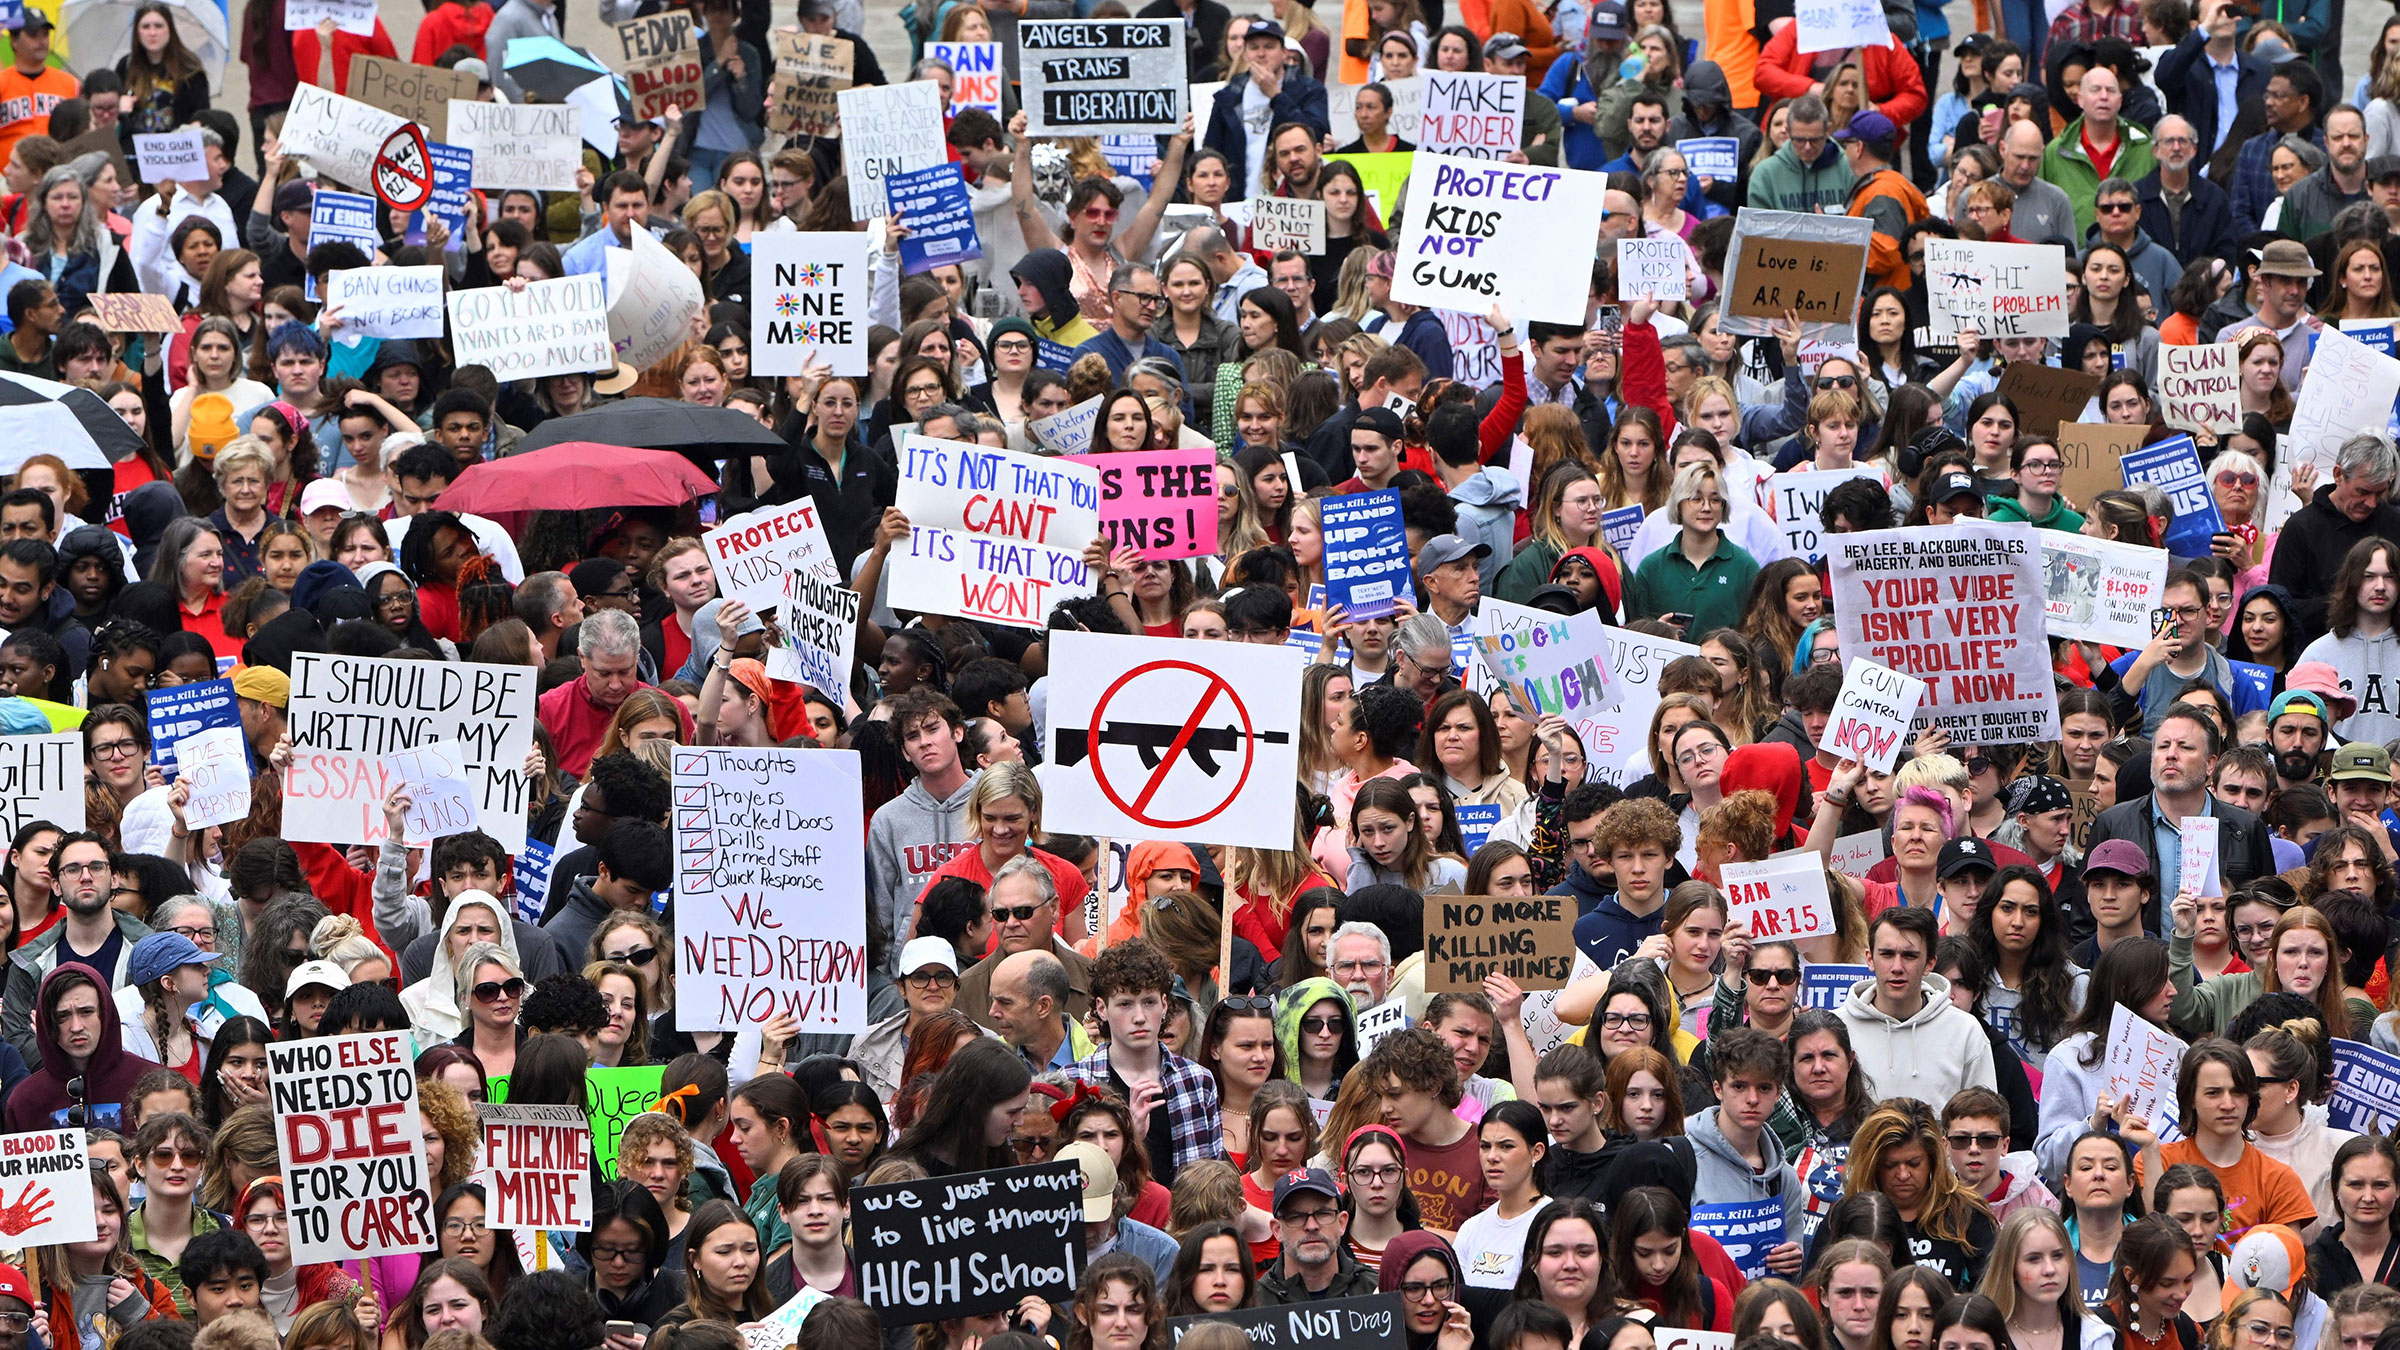 A huge crowd of people displays signs in support of high school students seeking to ban guns from school grounds